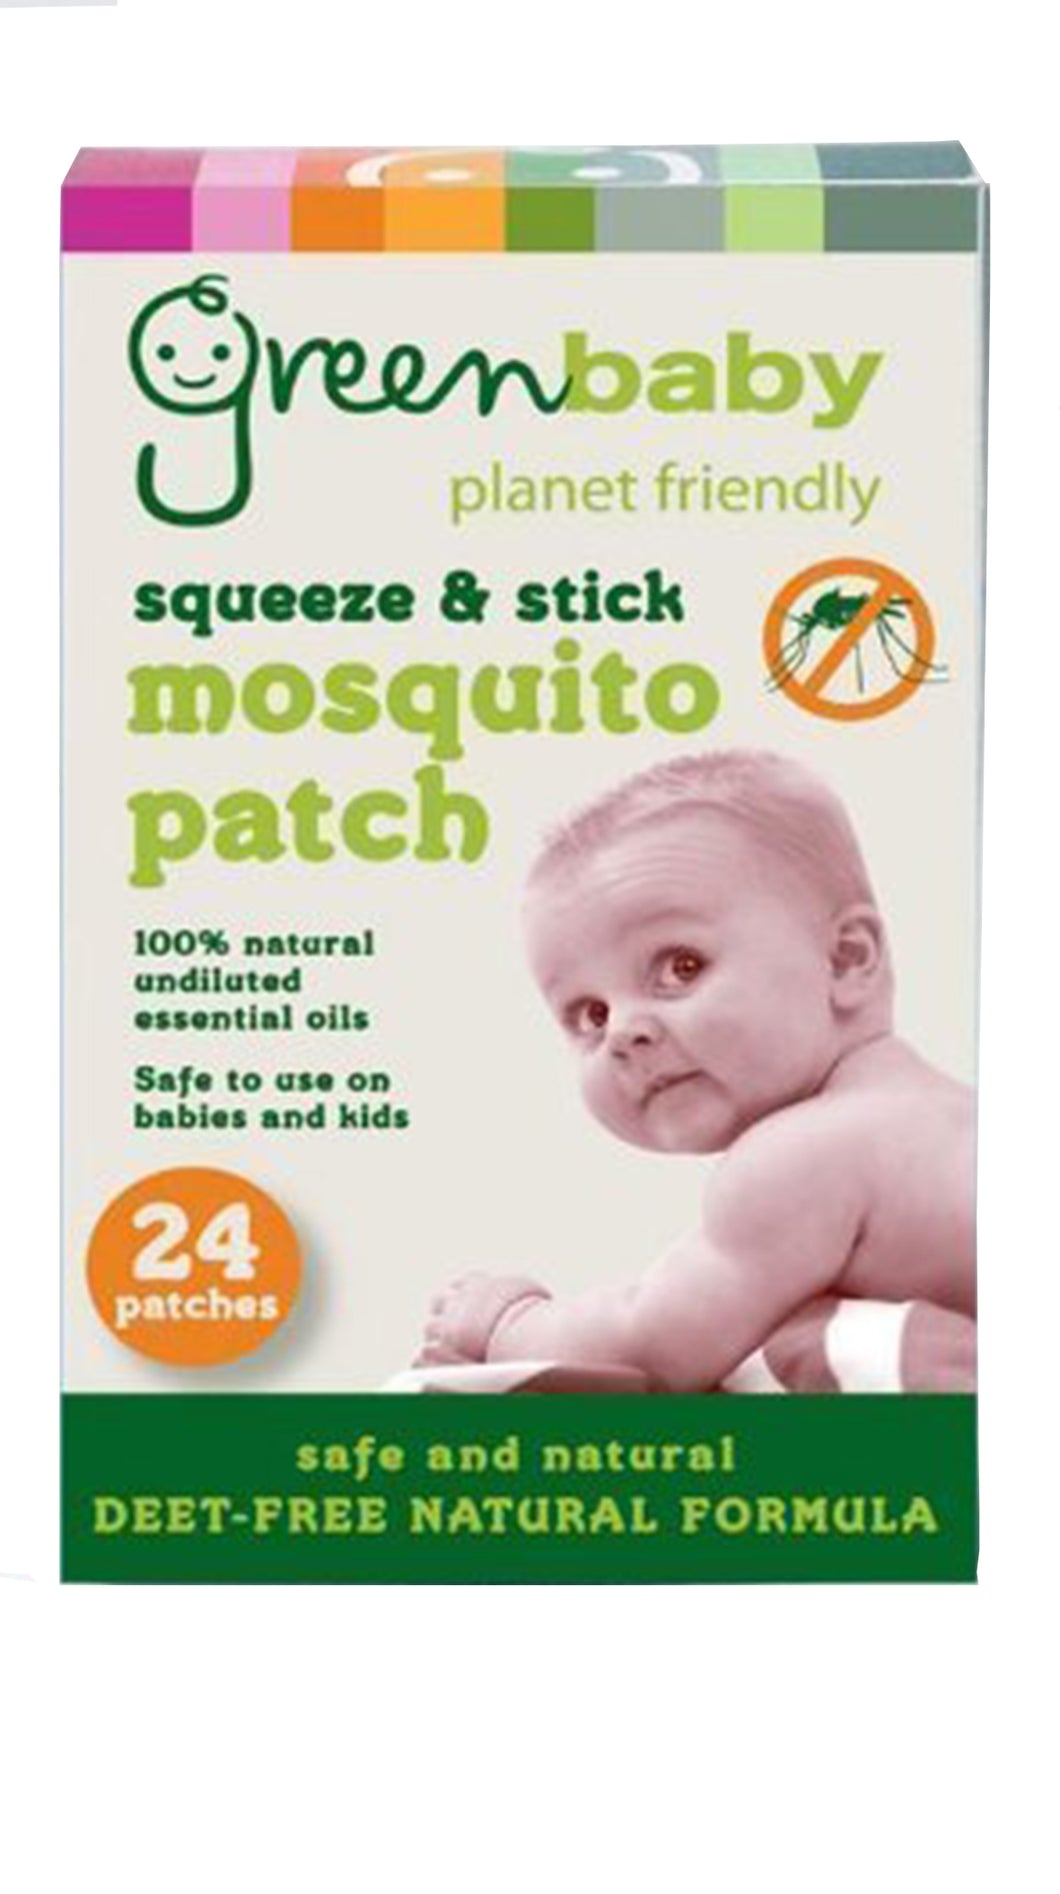 Green Baby Mosquito Patch Insect Repellent Deet Free 100% Natural